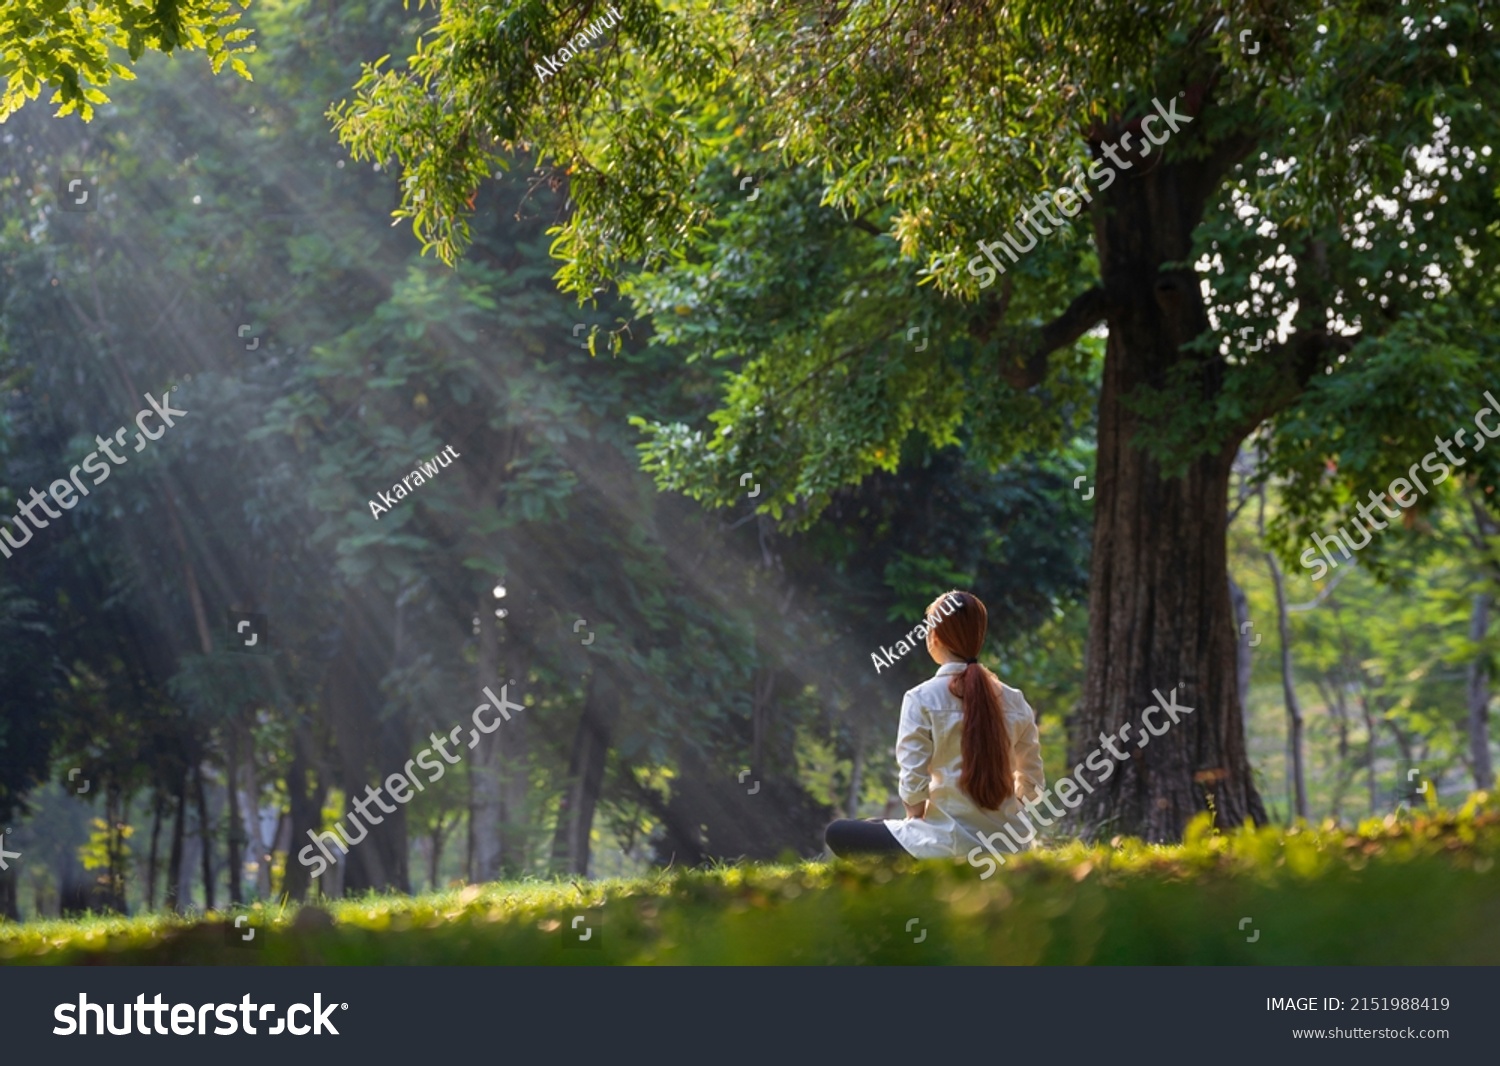 Back of woman relaxingly practicing meditation yoga in the forest to attain happiness from inner peace wisdom serenity with beam of sun light for healthy mind wellbeing and wellness soul concept #2151988419